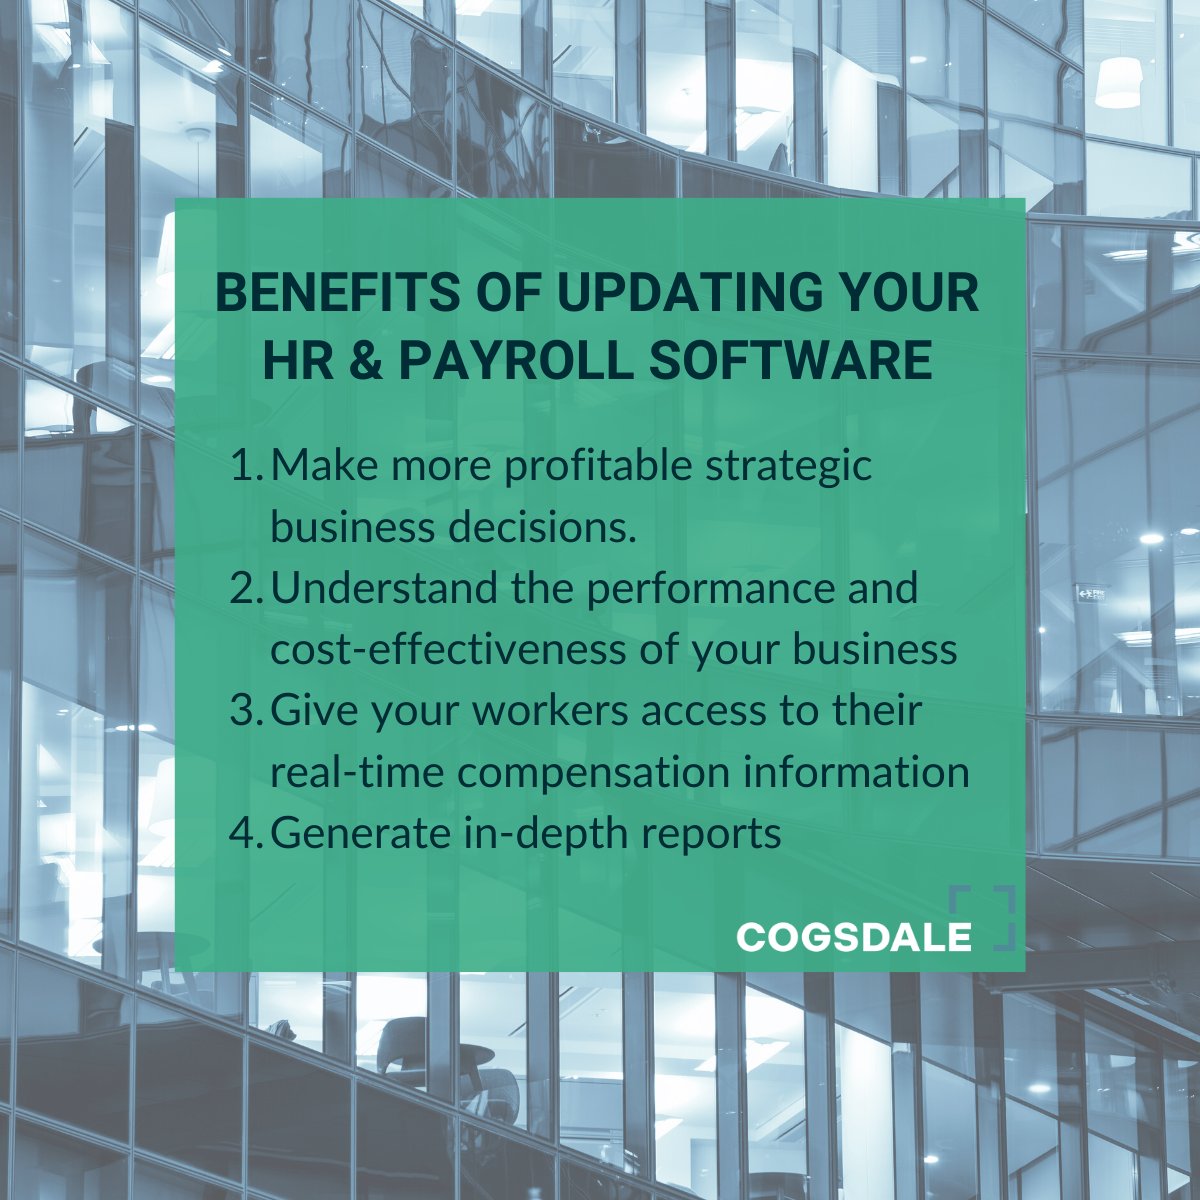 This year prioritize your business' operations, save time and improve the employee experience with a complete Human Resource Management Solution. 

#HRMS #HR #Payroll #employeeexperience #software #wearecogsdale #weareharris